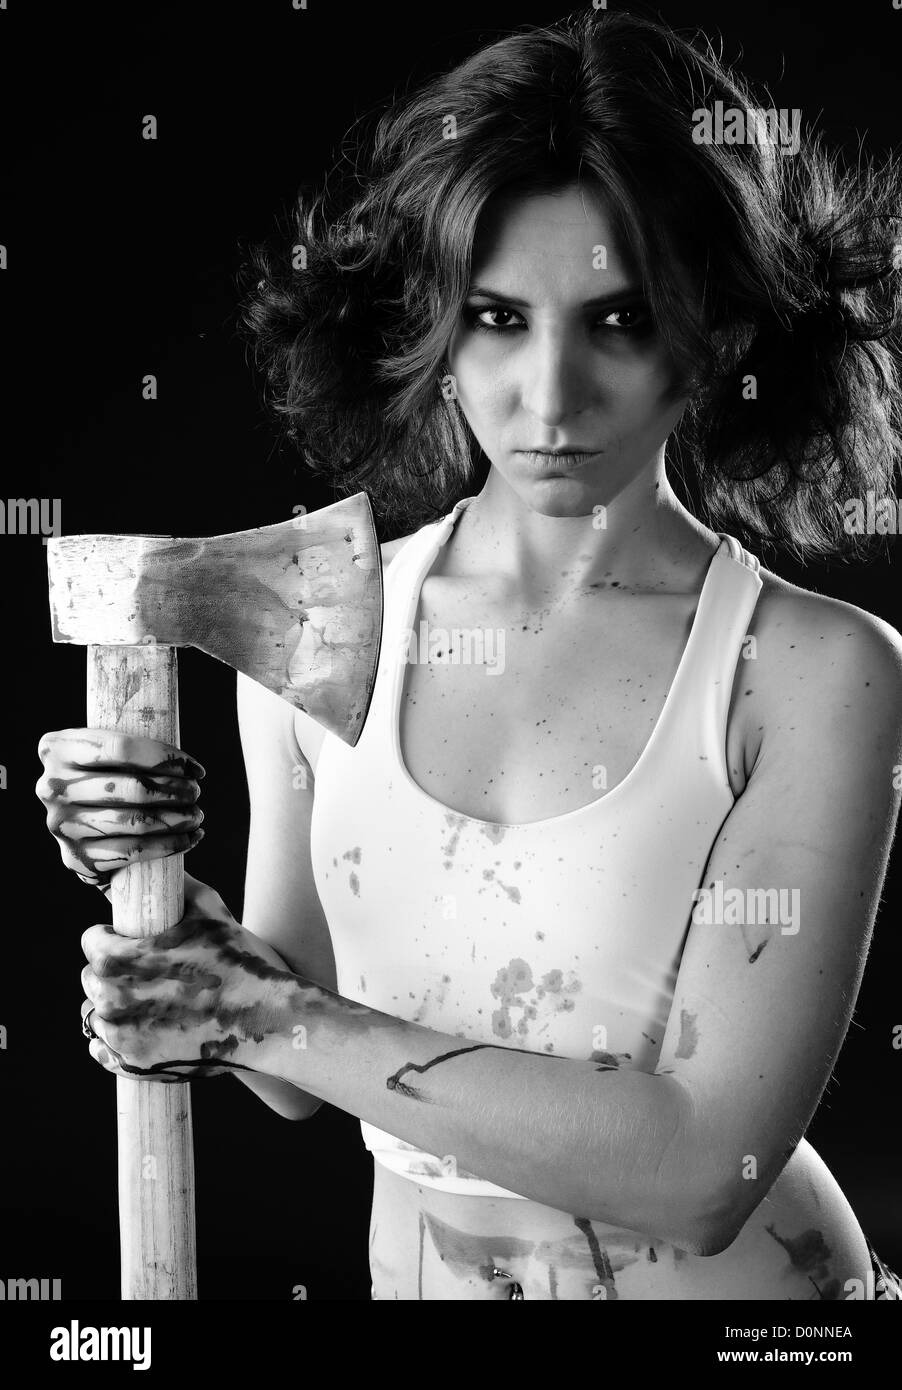 studio shot on black background: young woman holding bloody axe (axe girl) Stock Photo